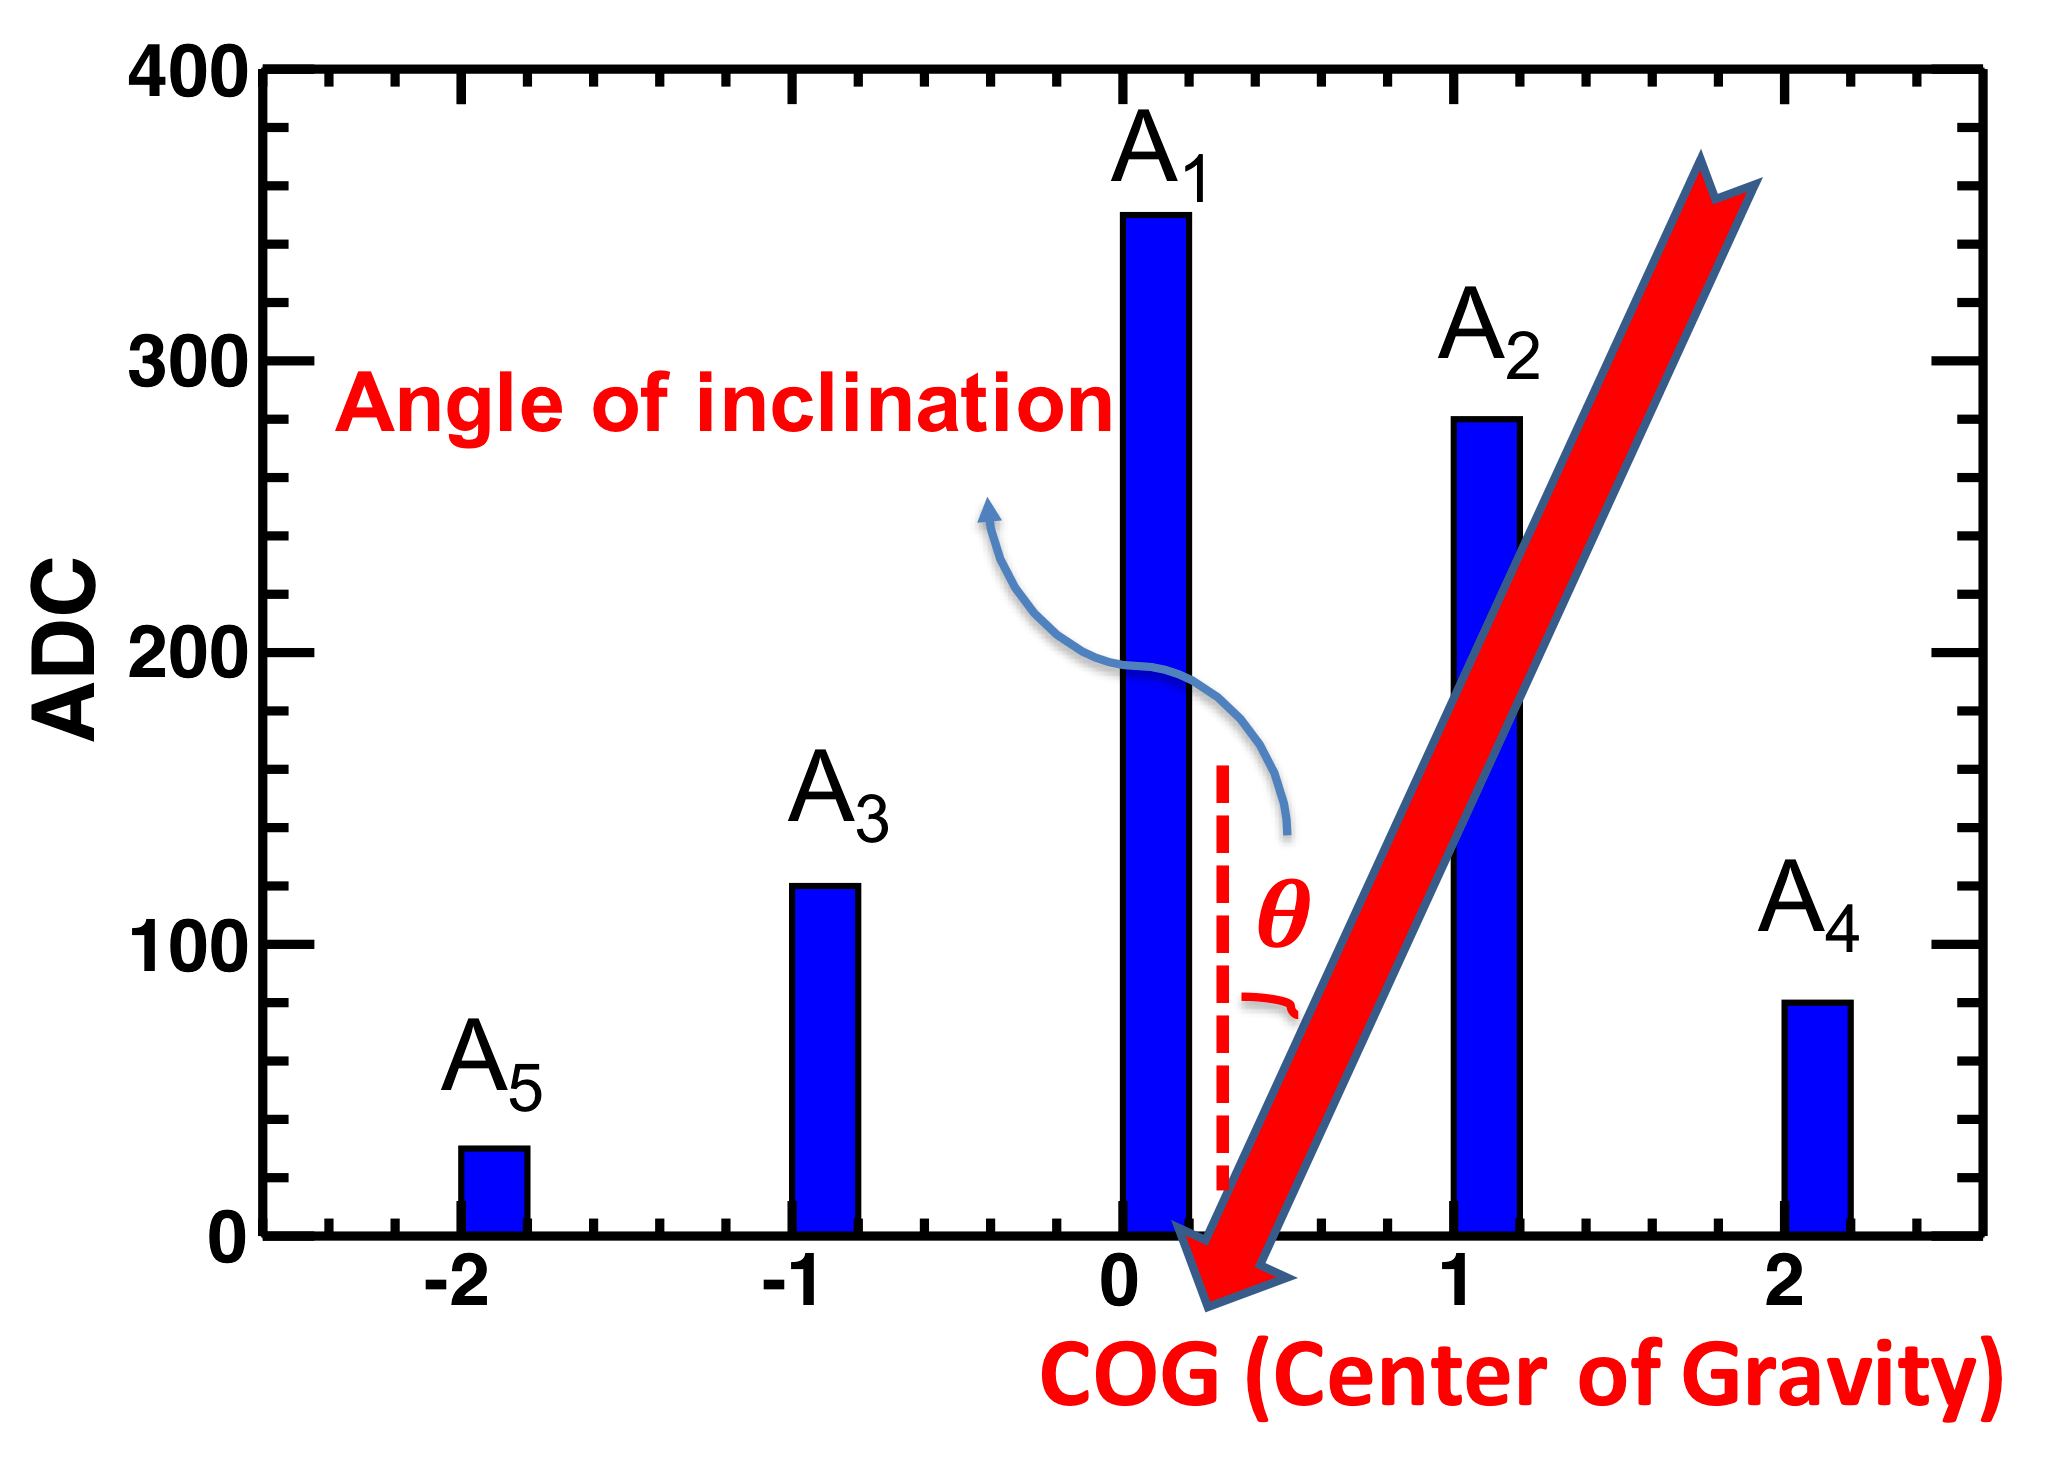 Schematic of ionization energy deposition signals per strip, in ADC counts; center of gravity, COG; and the inclination angle θ of the incident particle (red arrow).